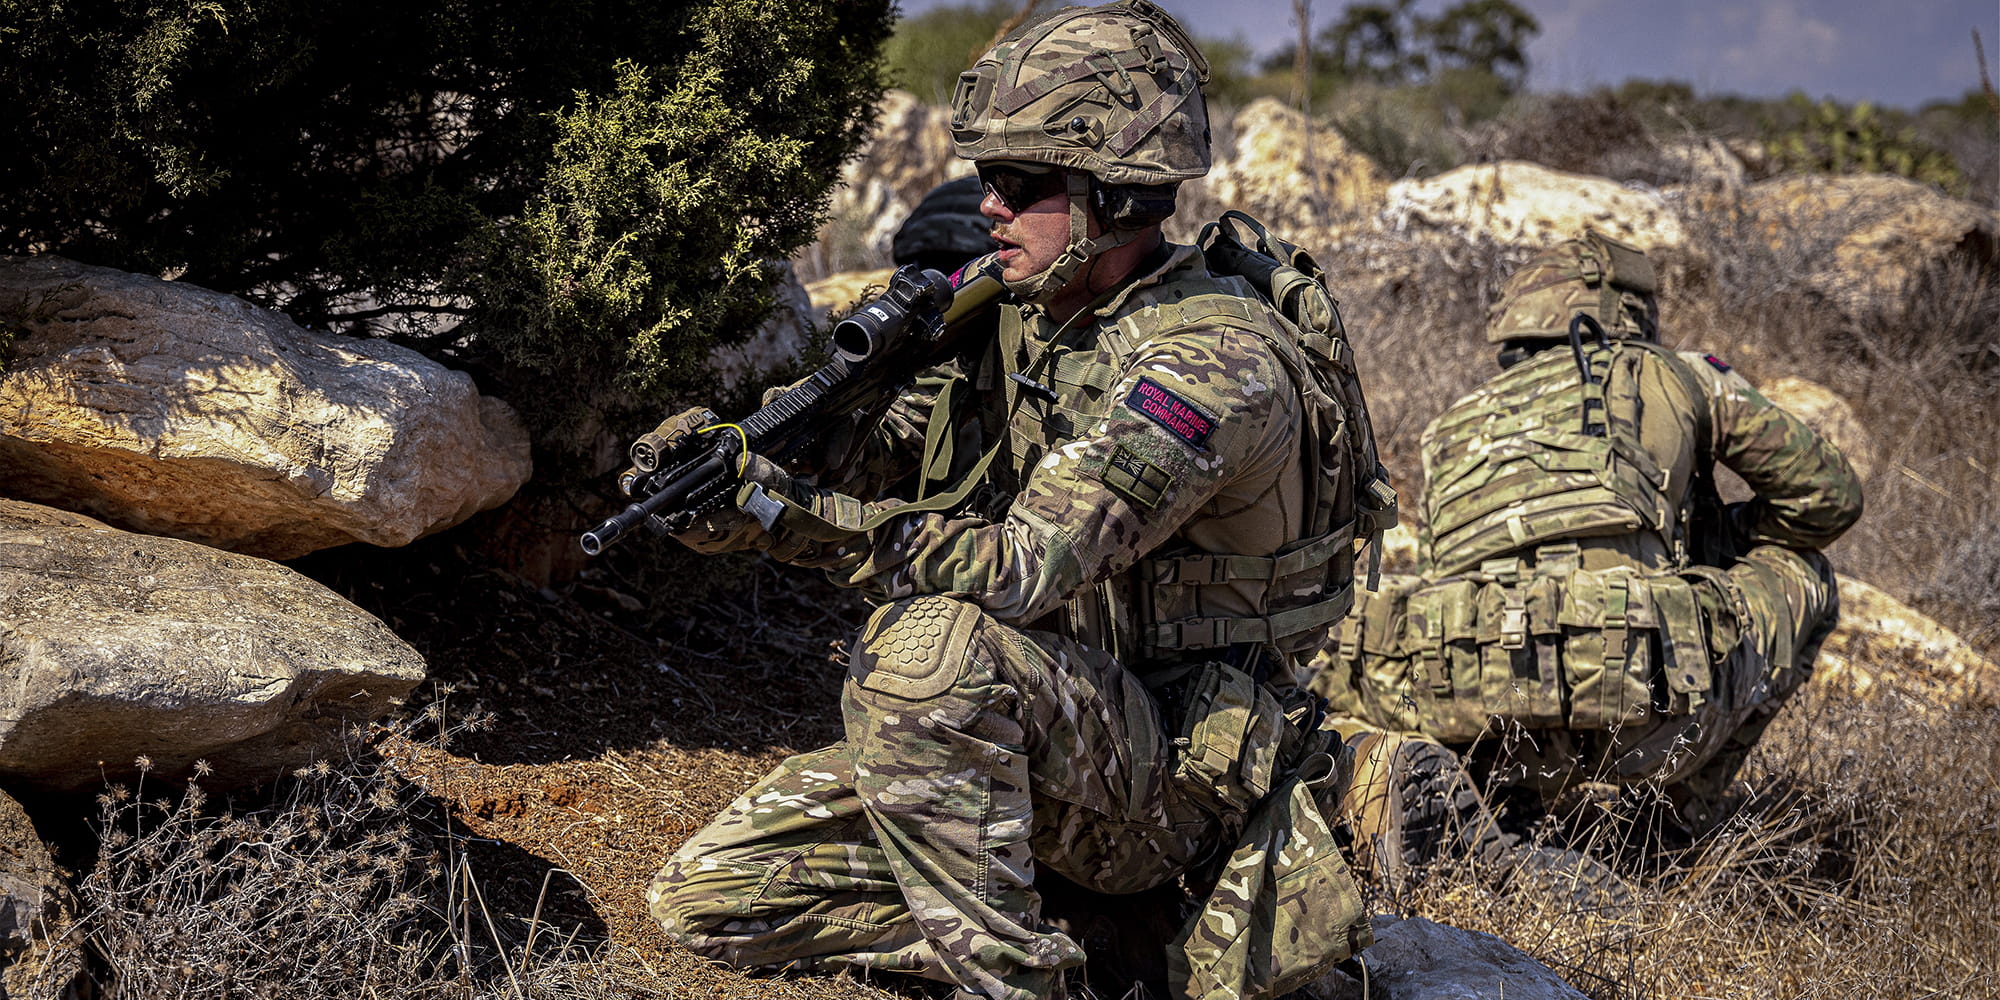 A Royal Marines Commando During live firing in Cyprus